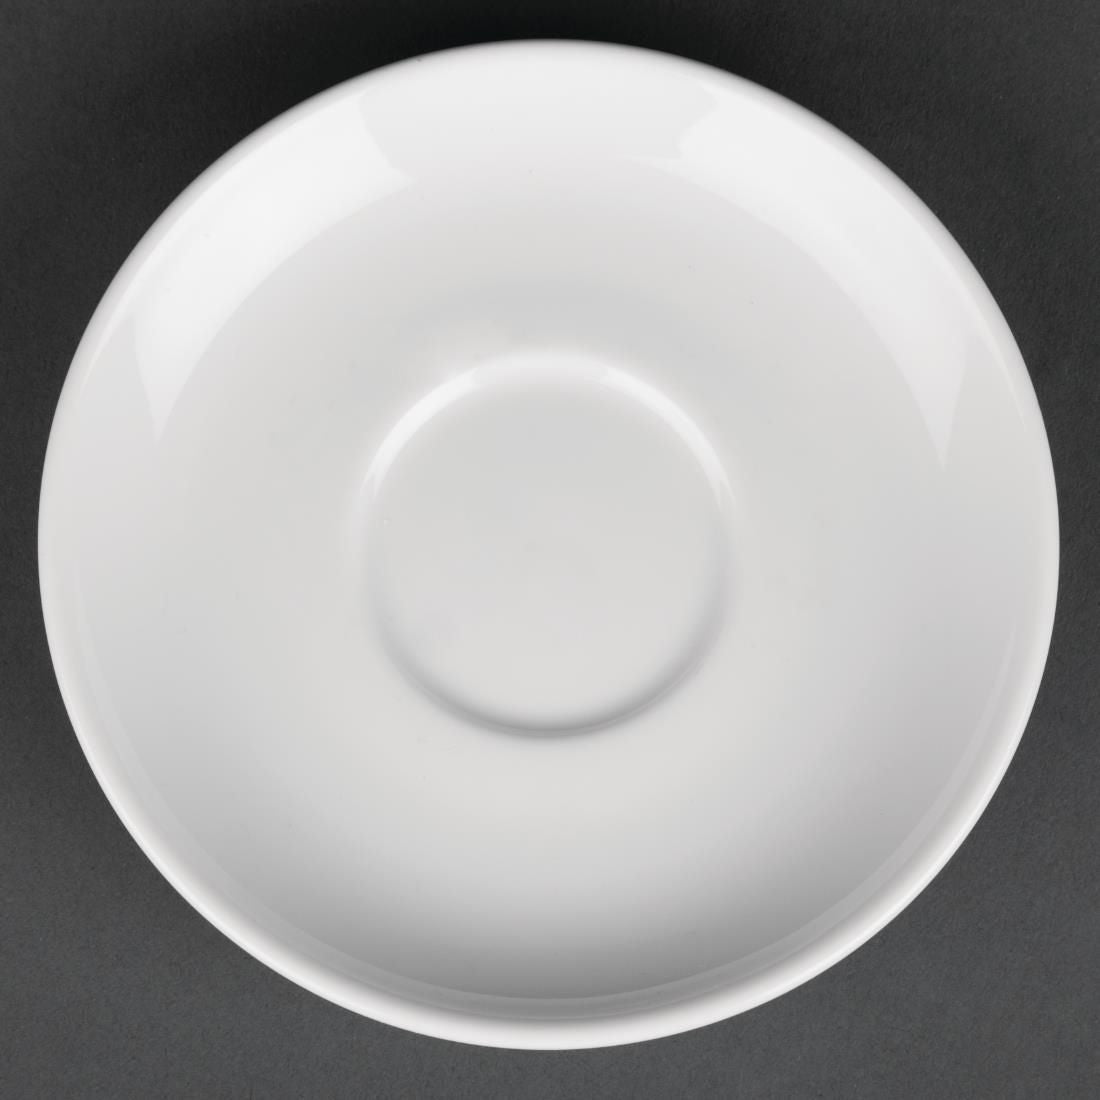 CG034 Royal Porcelain Classic White Espresso Cups Saucer 125mm (Pack of 12)